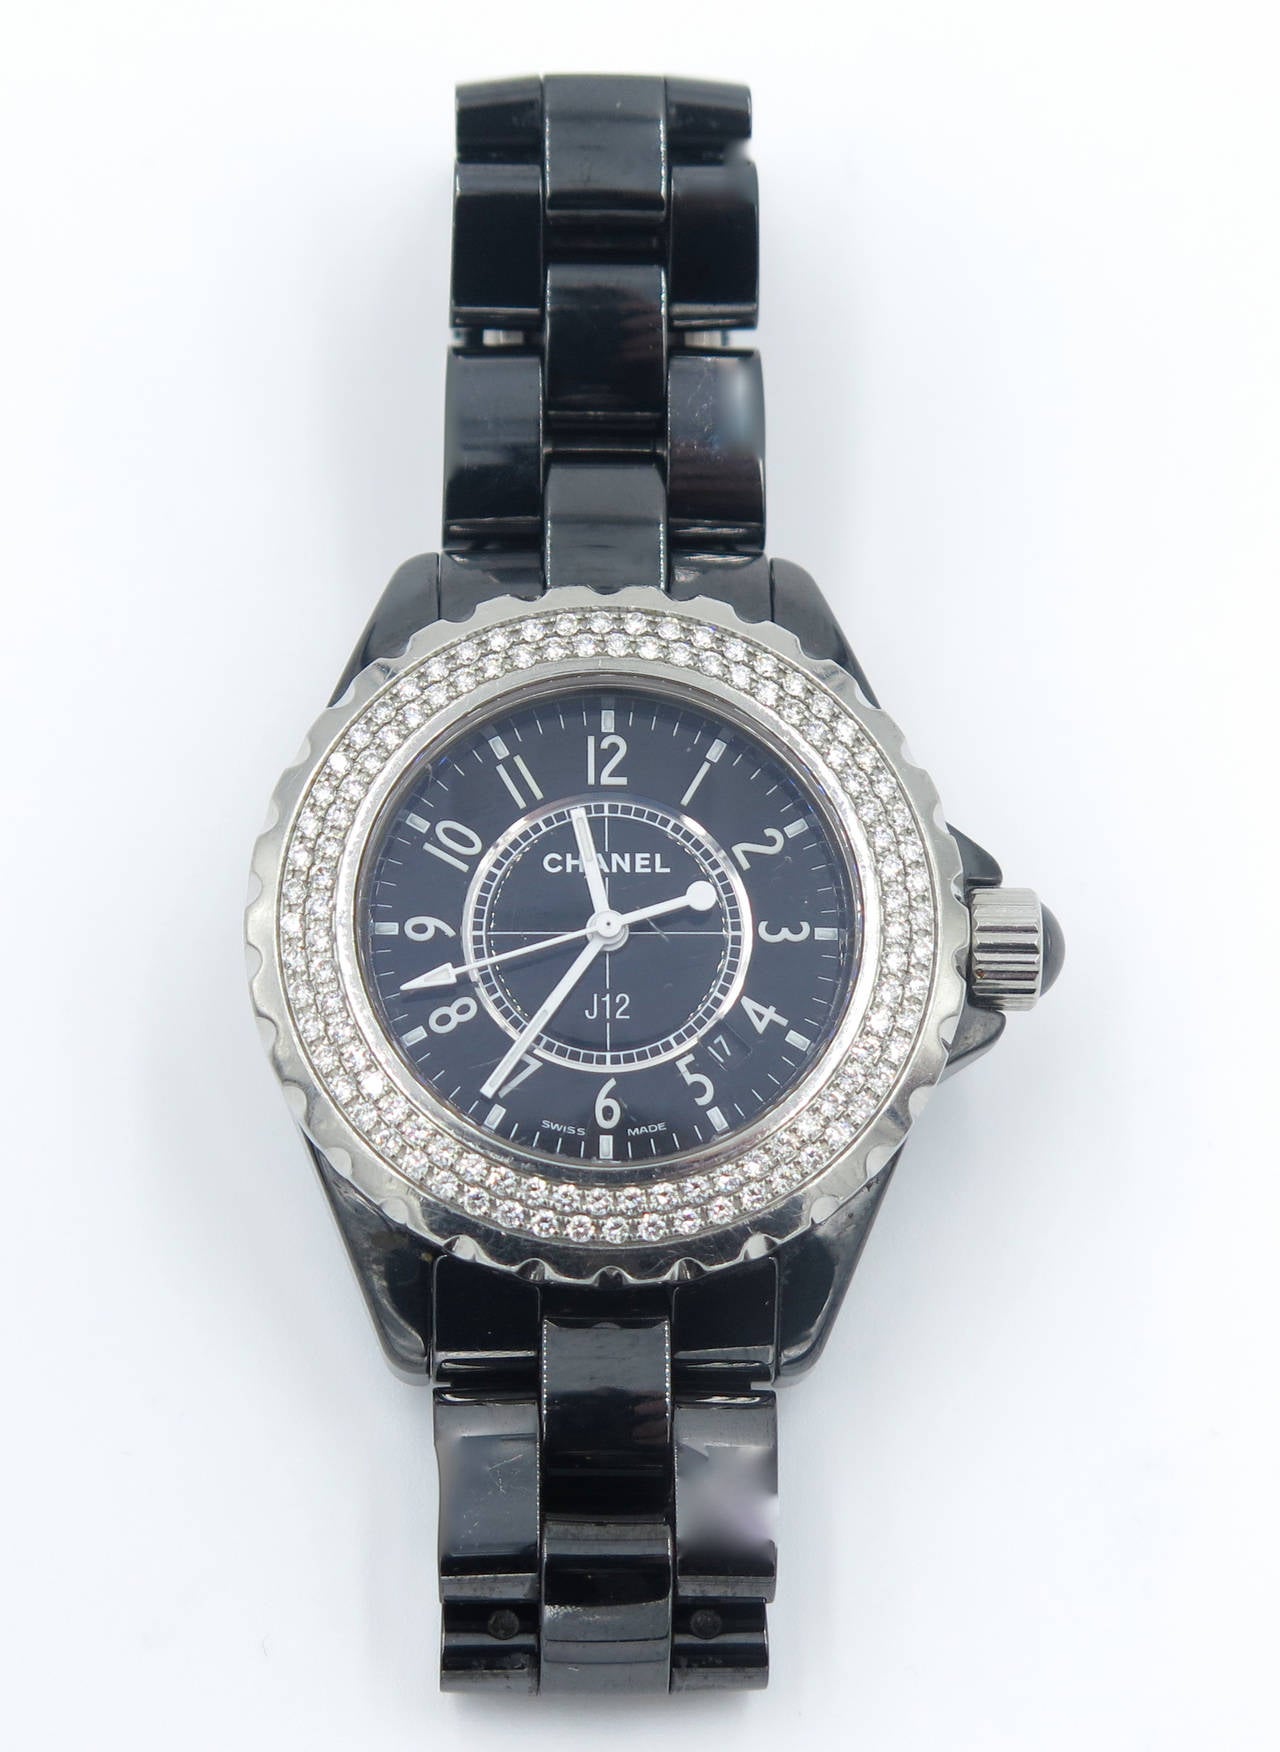 A stainless steel and black ceramic J12 watch by Chanel.  The black ceramic watch features a stainless steel bezel set with 118 round brilliant cut diamonds weighing approximately 1.60 carats.  Quartz movement, Swiss made with numbers Z.M. 23549.  